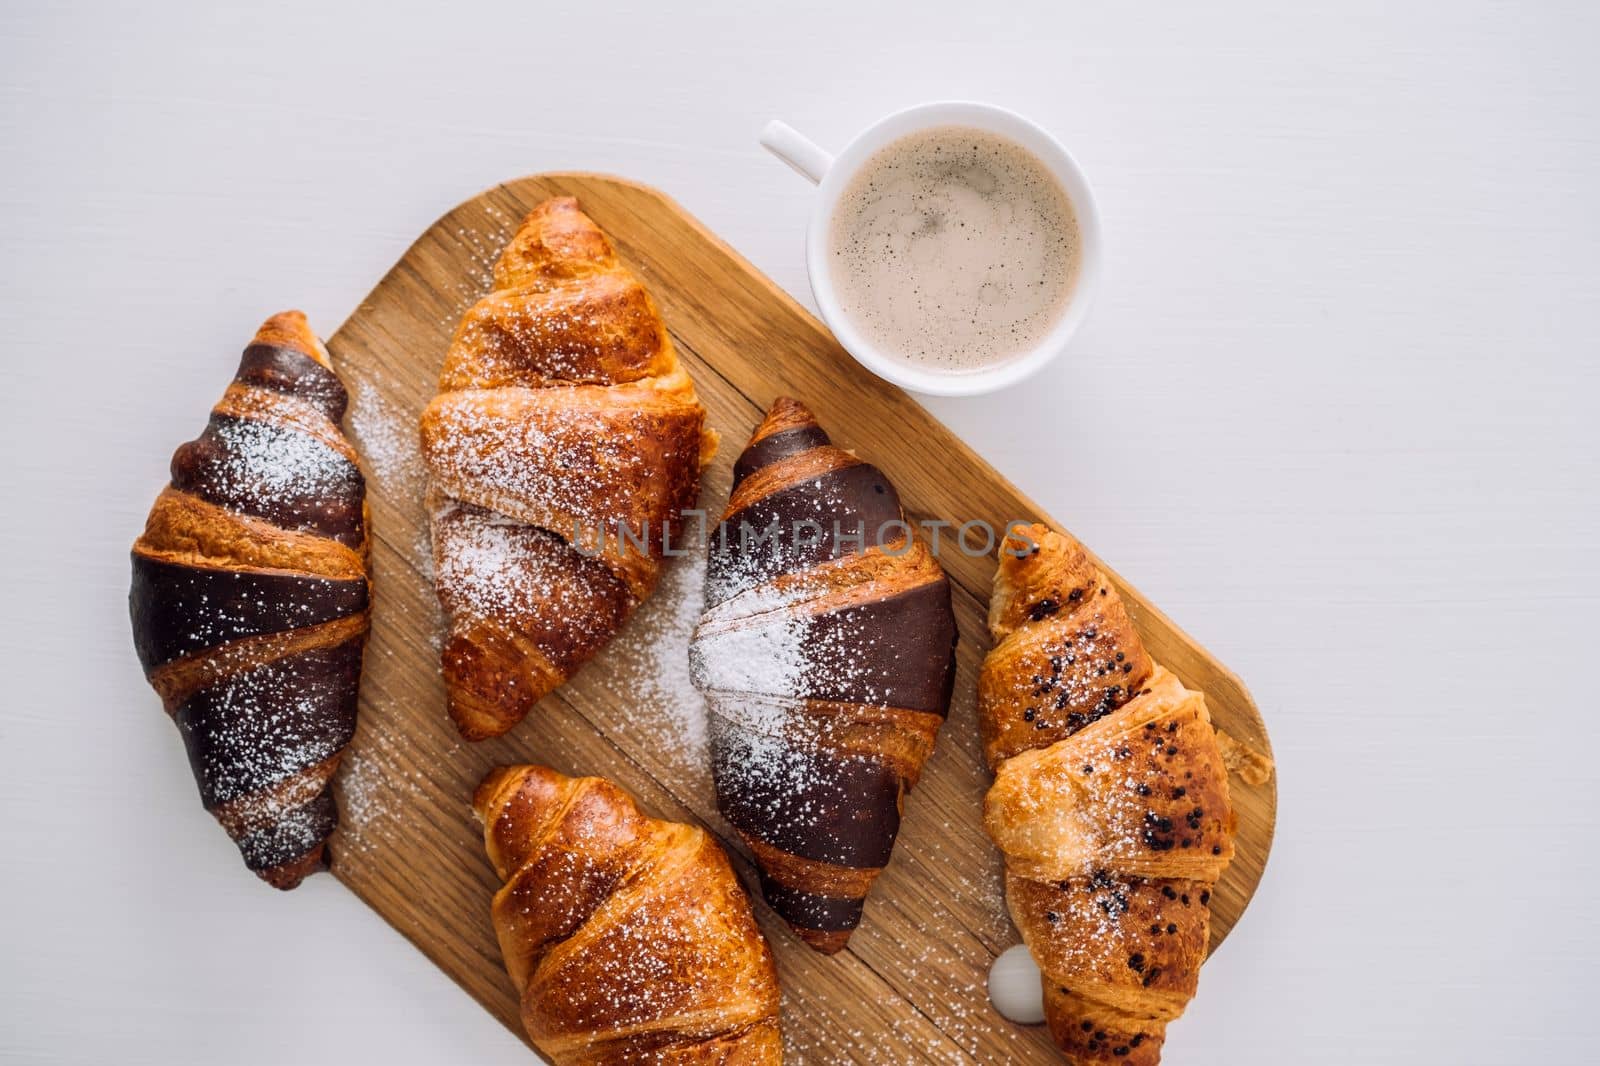 Cup of coffee and bunch of appetizing brown and chocolate croissants with powdered sugar on a wooden board on white table, flat lay